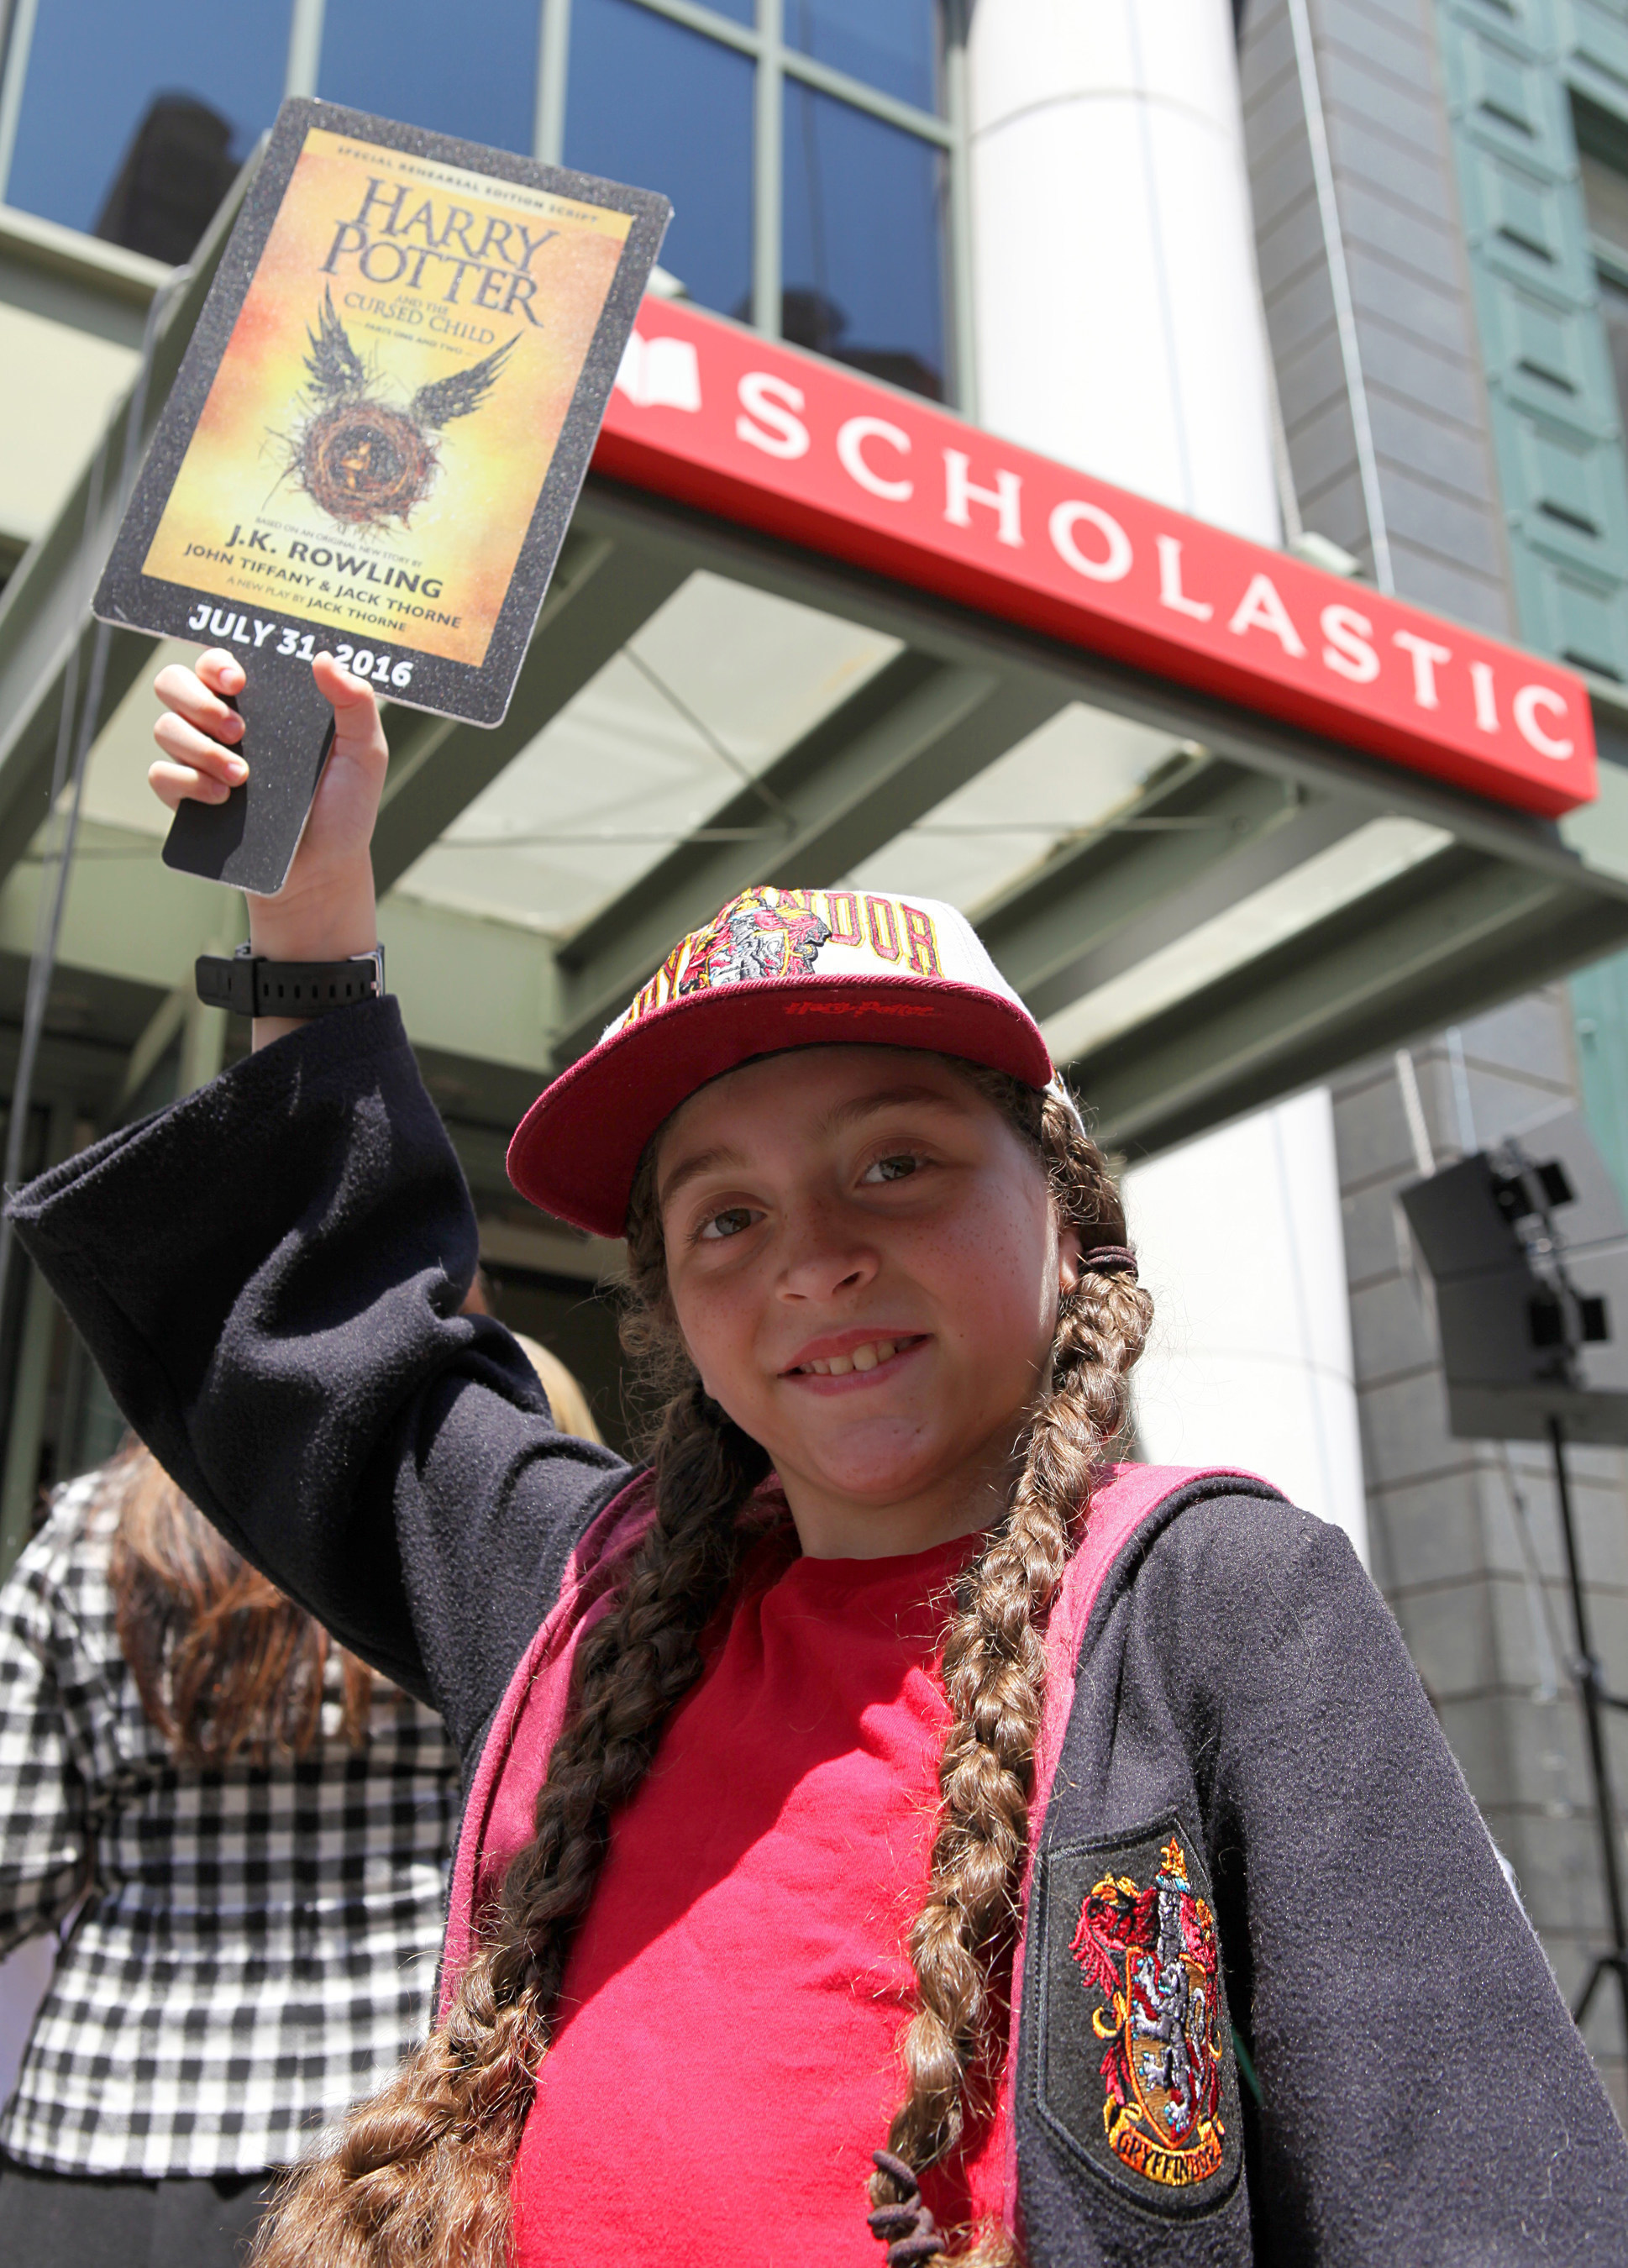 A Scholastic employee's daughter, 10-year-old Ella, joins the "Muggle Mob" of 300 Harry Potter fans in front of the Scholastic headquarters building in New York City on July 21, celebrating the upcoming release of "Harry Potter and the Cursed Child Parts One and Two," the eighth story, on July 31, 2016 at 12:01 a.m. ET. Credit: Scholastic